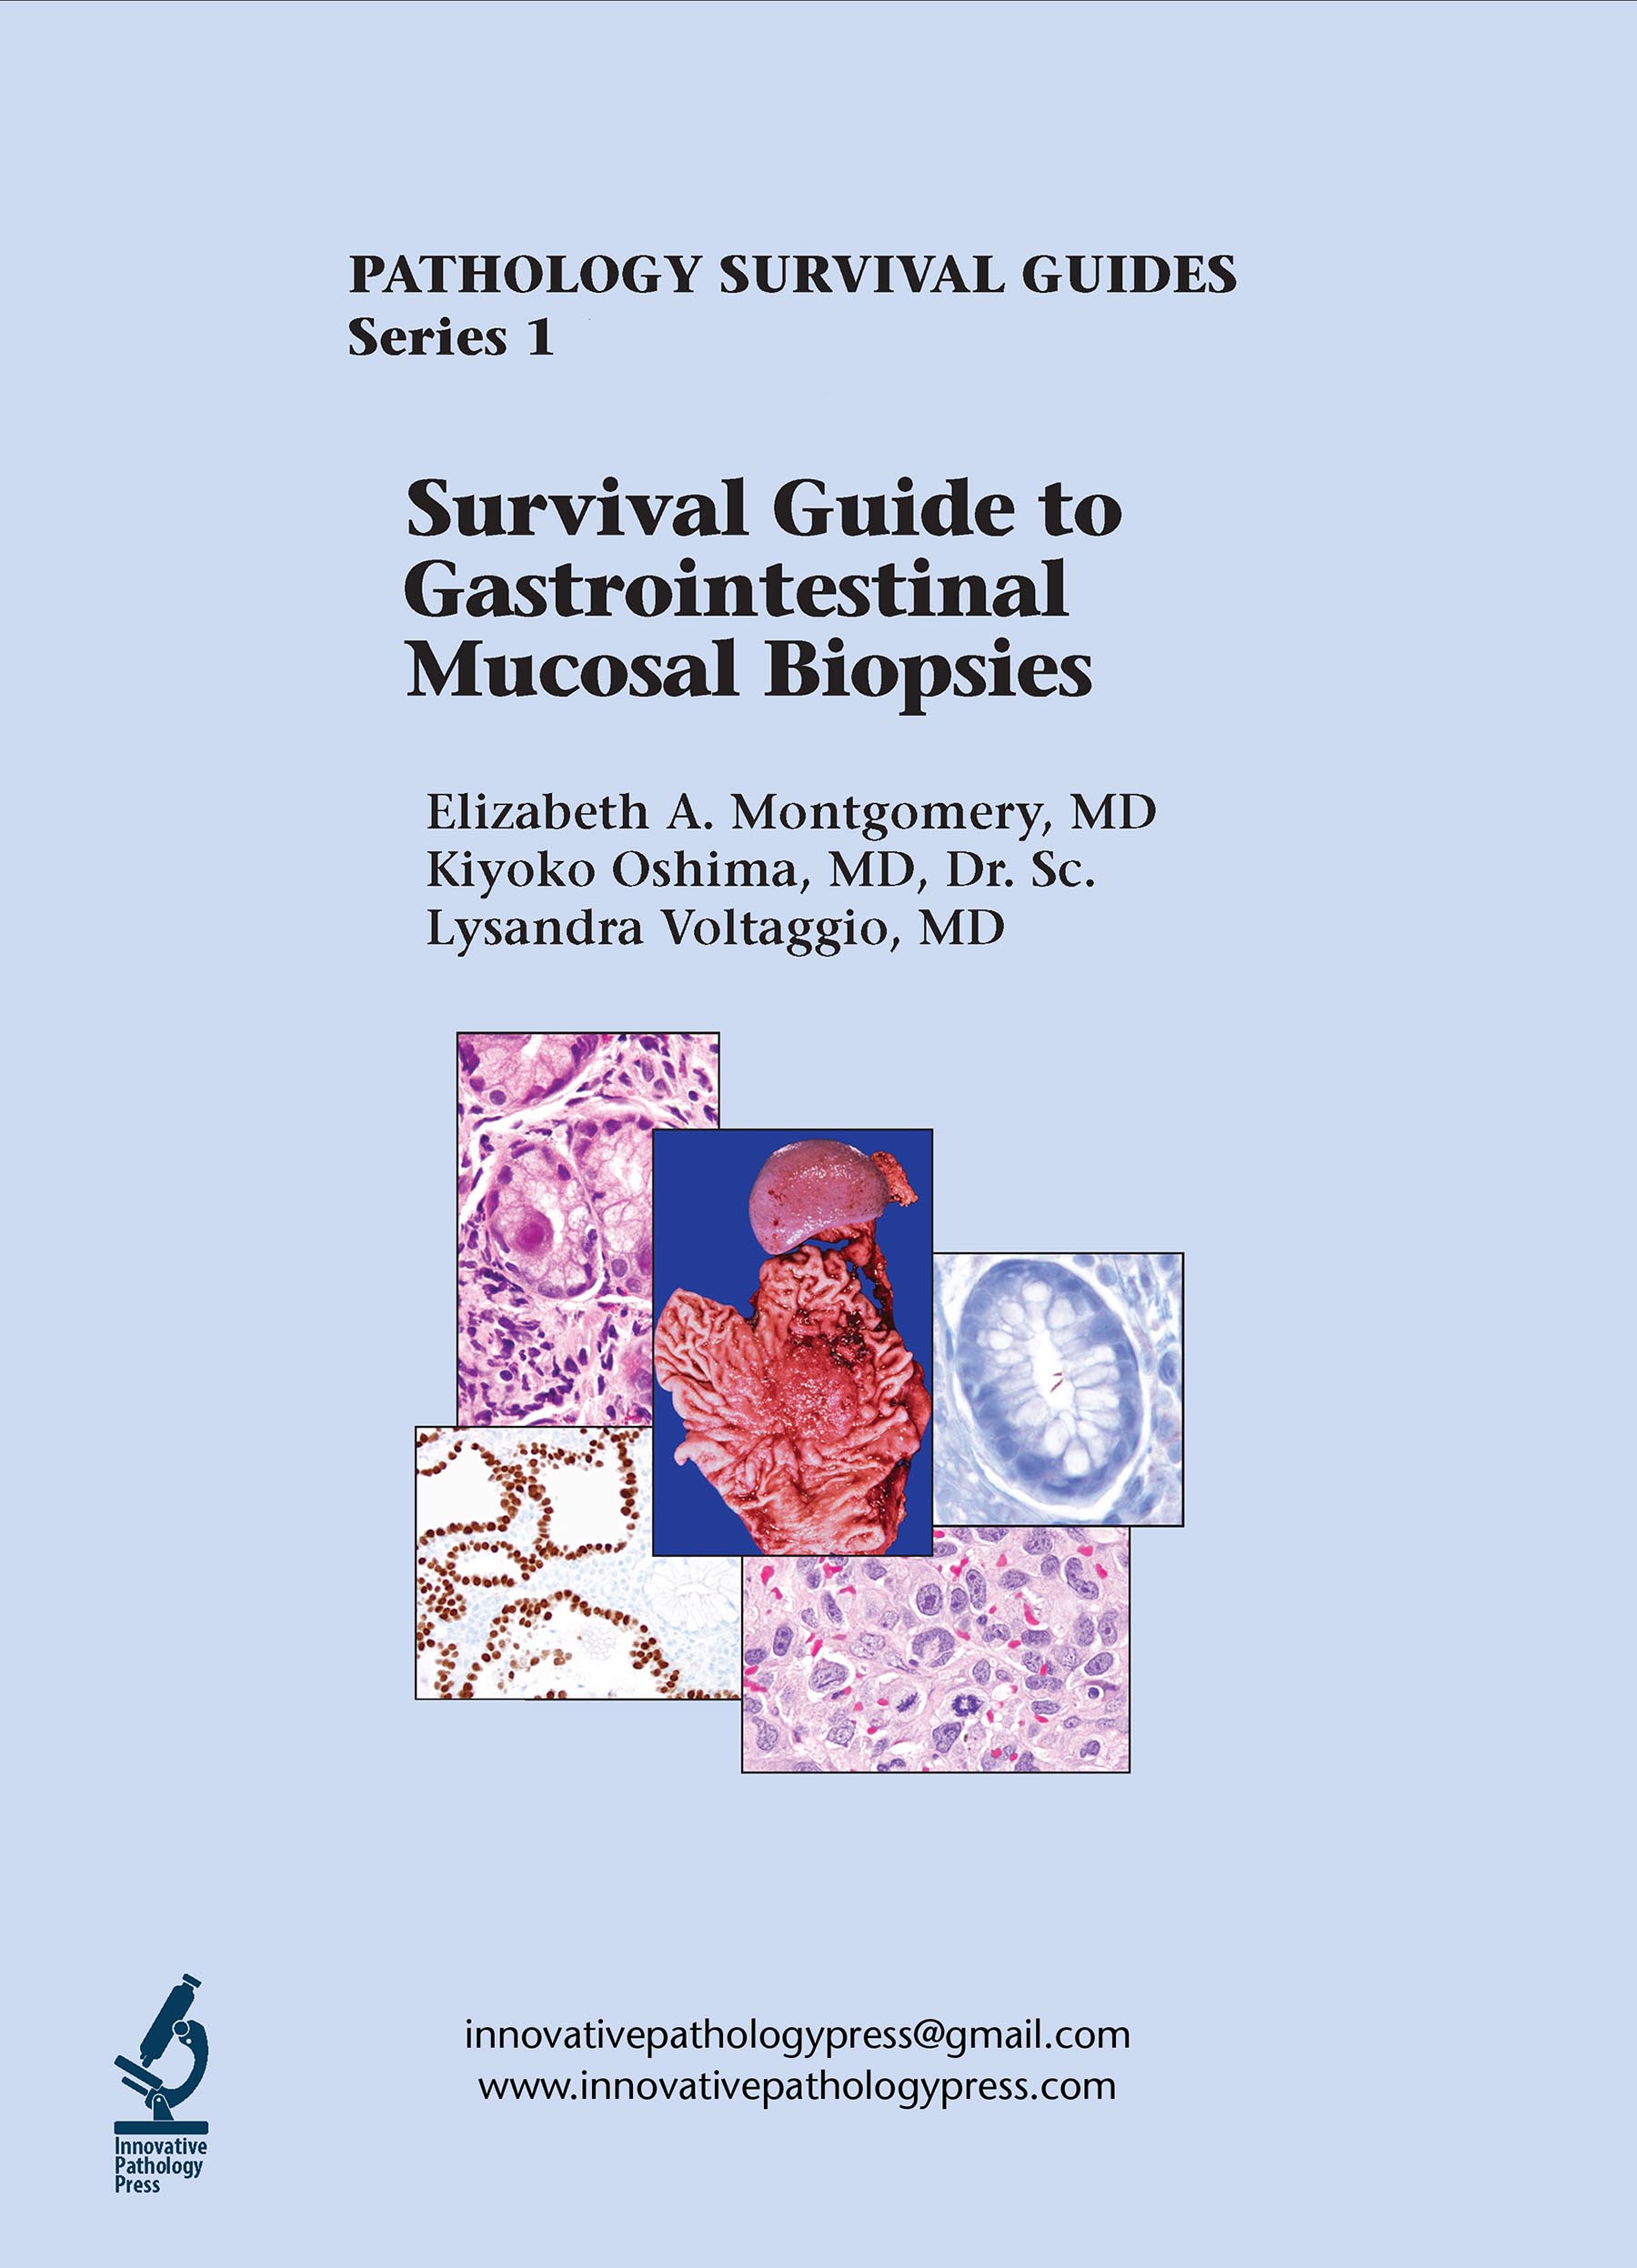 Pathology Survival Guides, Series 1Vol.1: Survival Guide to Gastrointestinal MucosalBiopsies